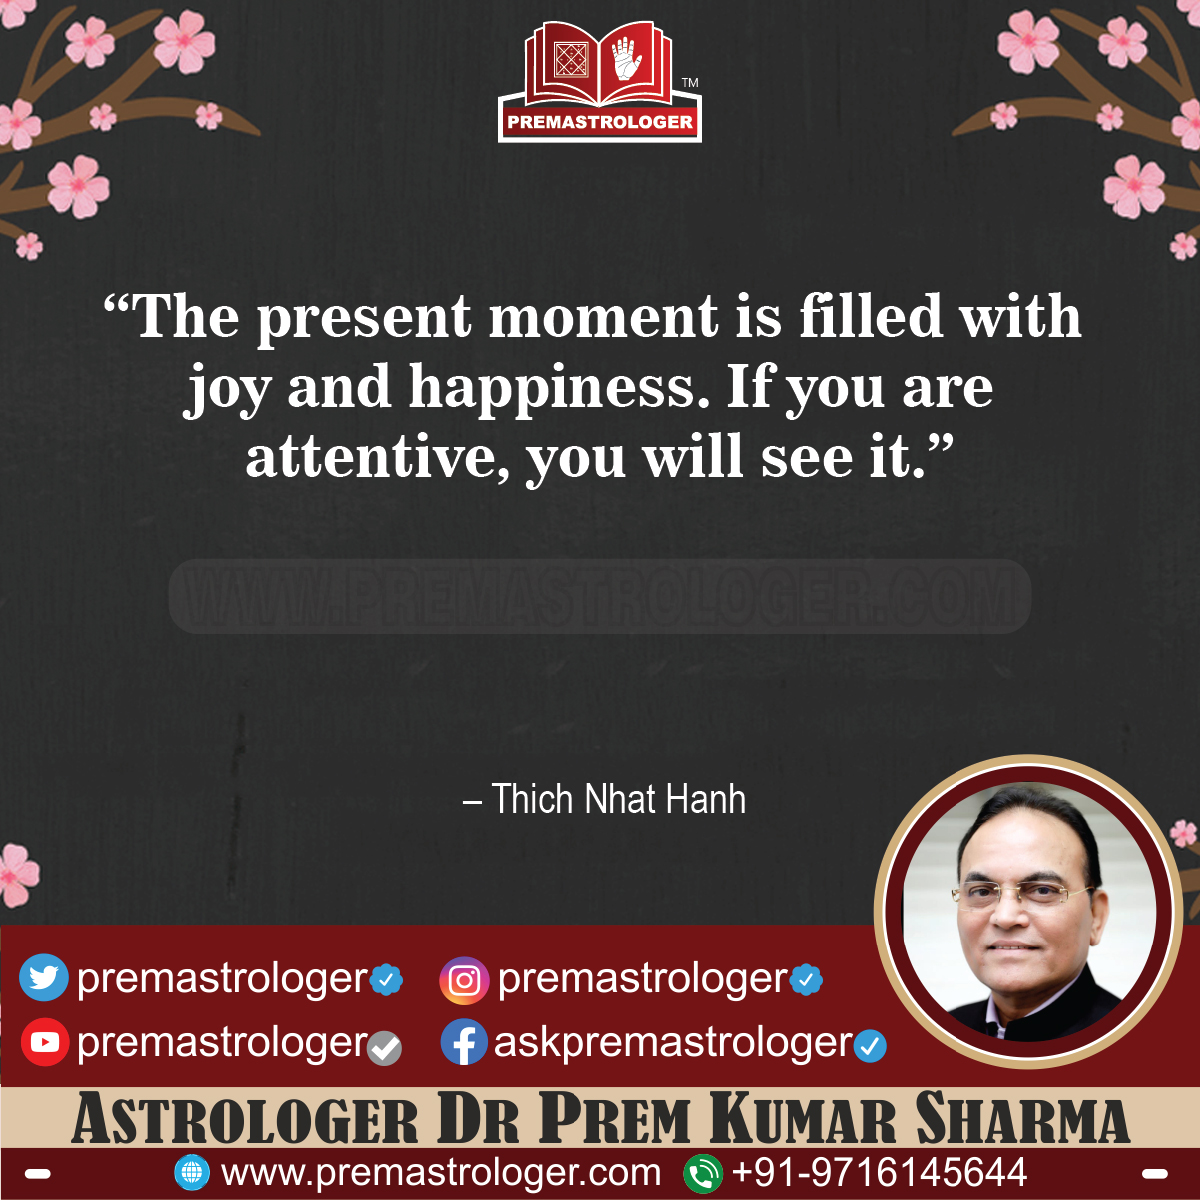 “The present moment is filled with joy and happiness. If you are attentive, you will see it.” 

— Thich Nhat Hanh

#MotivationalQuotes
#motivational
#positivityspread
#PositiveVibes